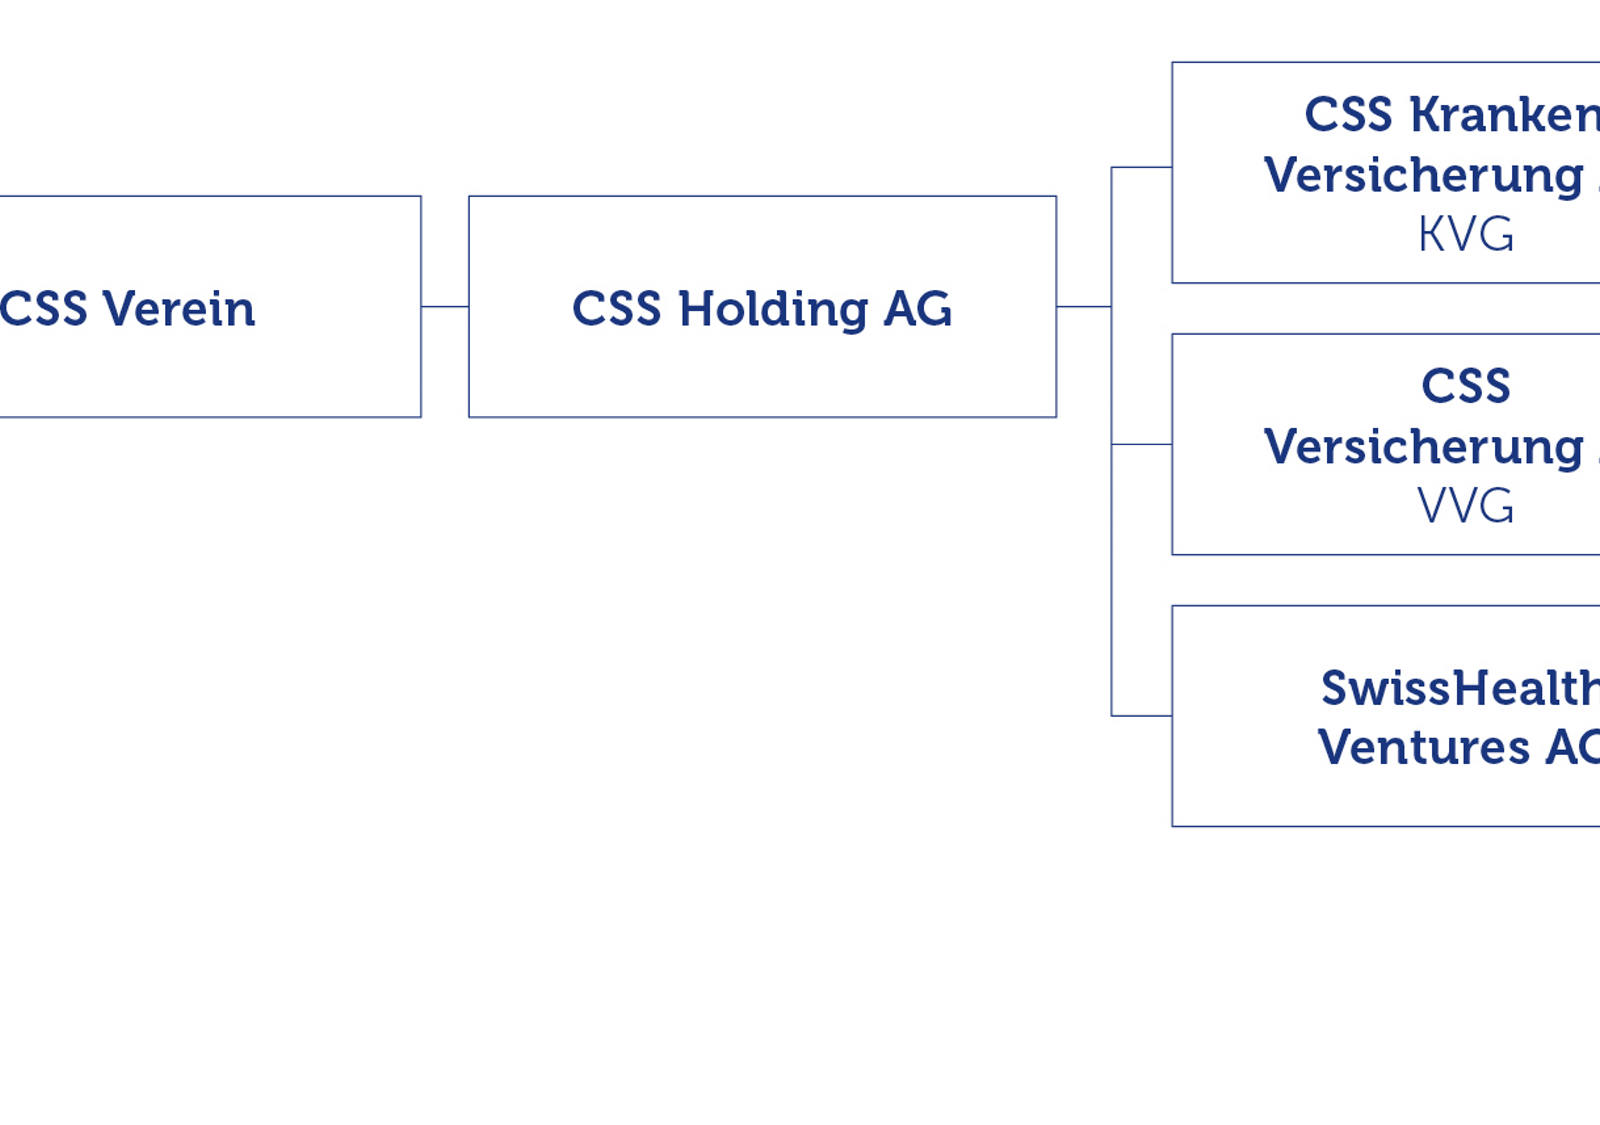 Organisation chart of the CSS Group